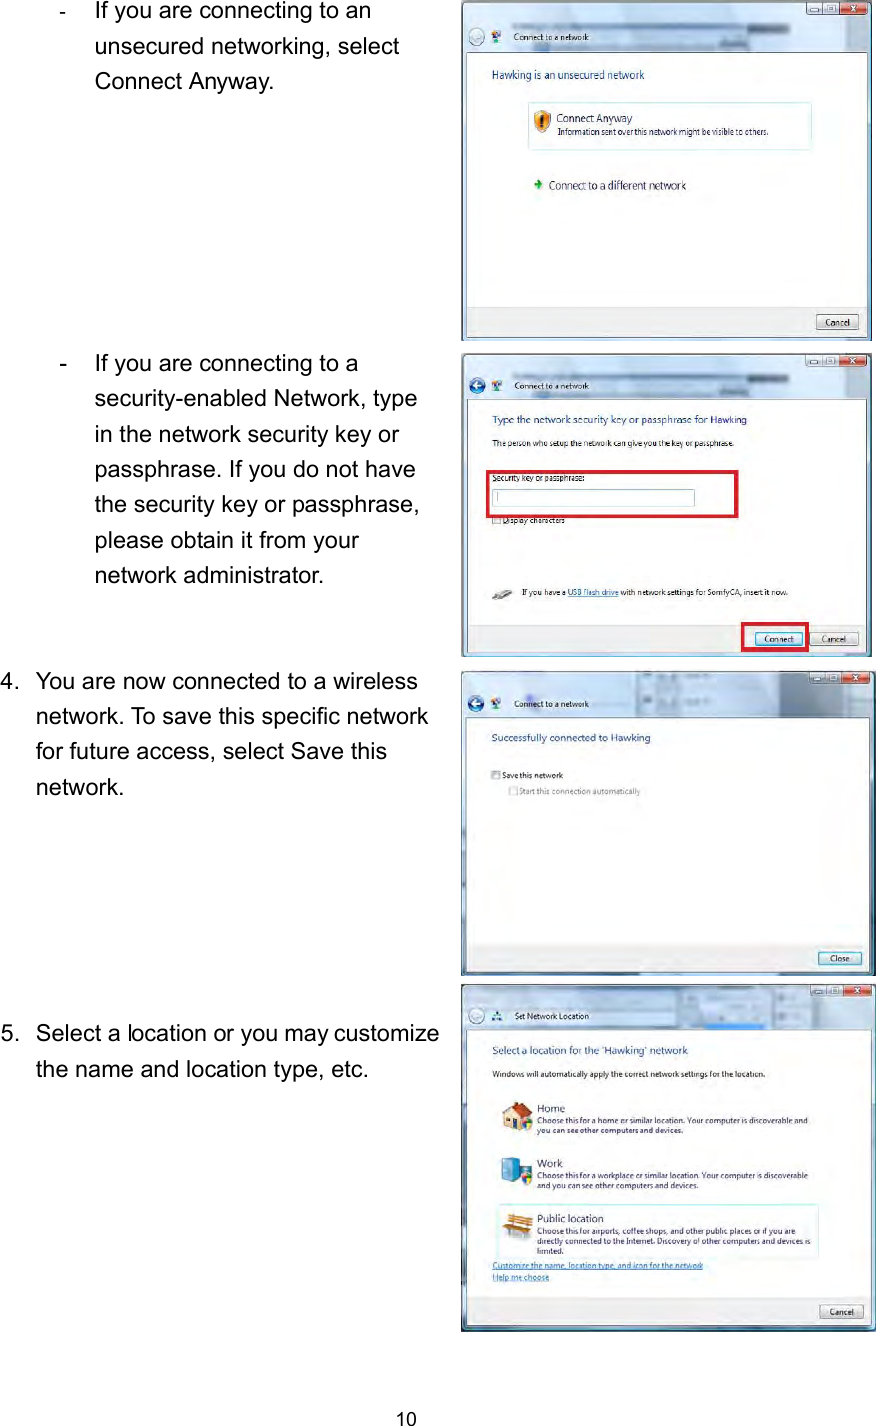  10 -  If you are connecting to an unsecured networking, select Connect Anyway.     -  If you are connecting to a security-enabled Network, type in the network security key or passphrase. If you do not have the security key or passphrase, please obtain it from your network administrator.   4.  You are now connected to a wireless network. To save this specific network for future access, select Save this network.    5.  Select a location or you may customize the name and location type, etc.  